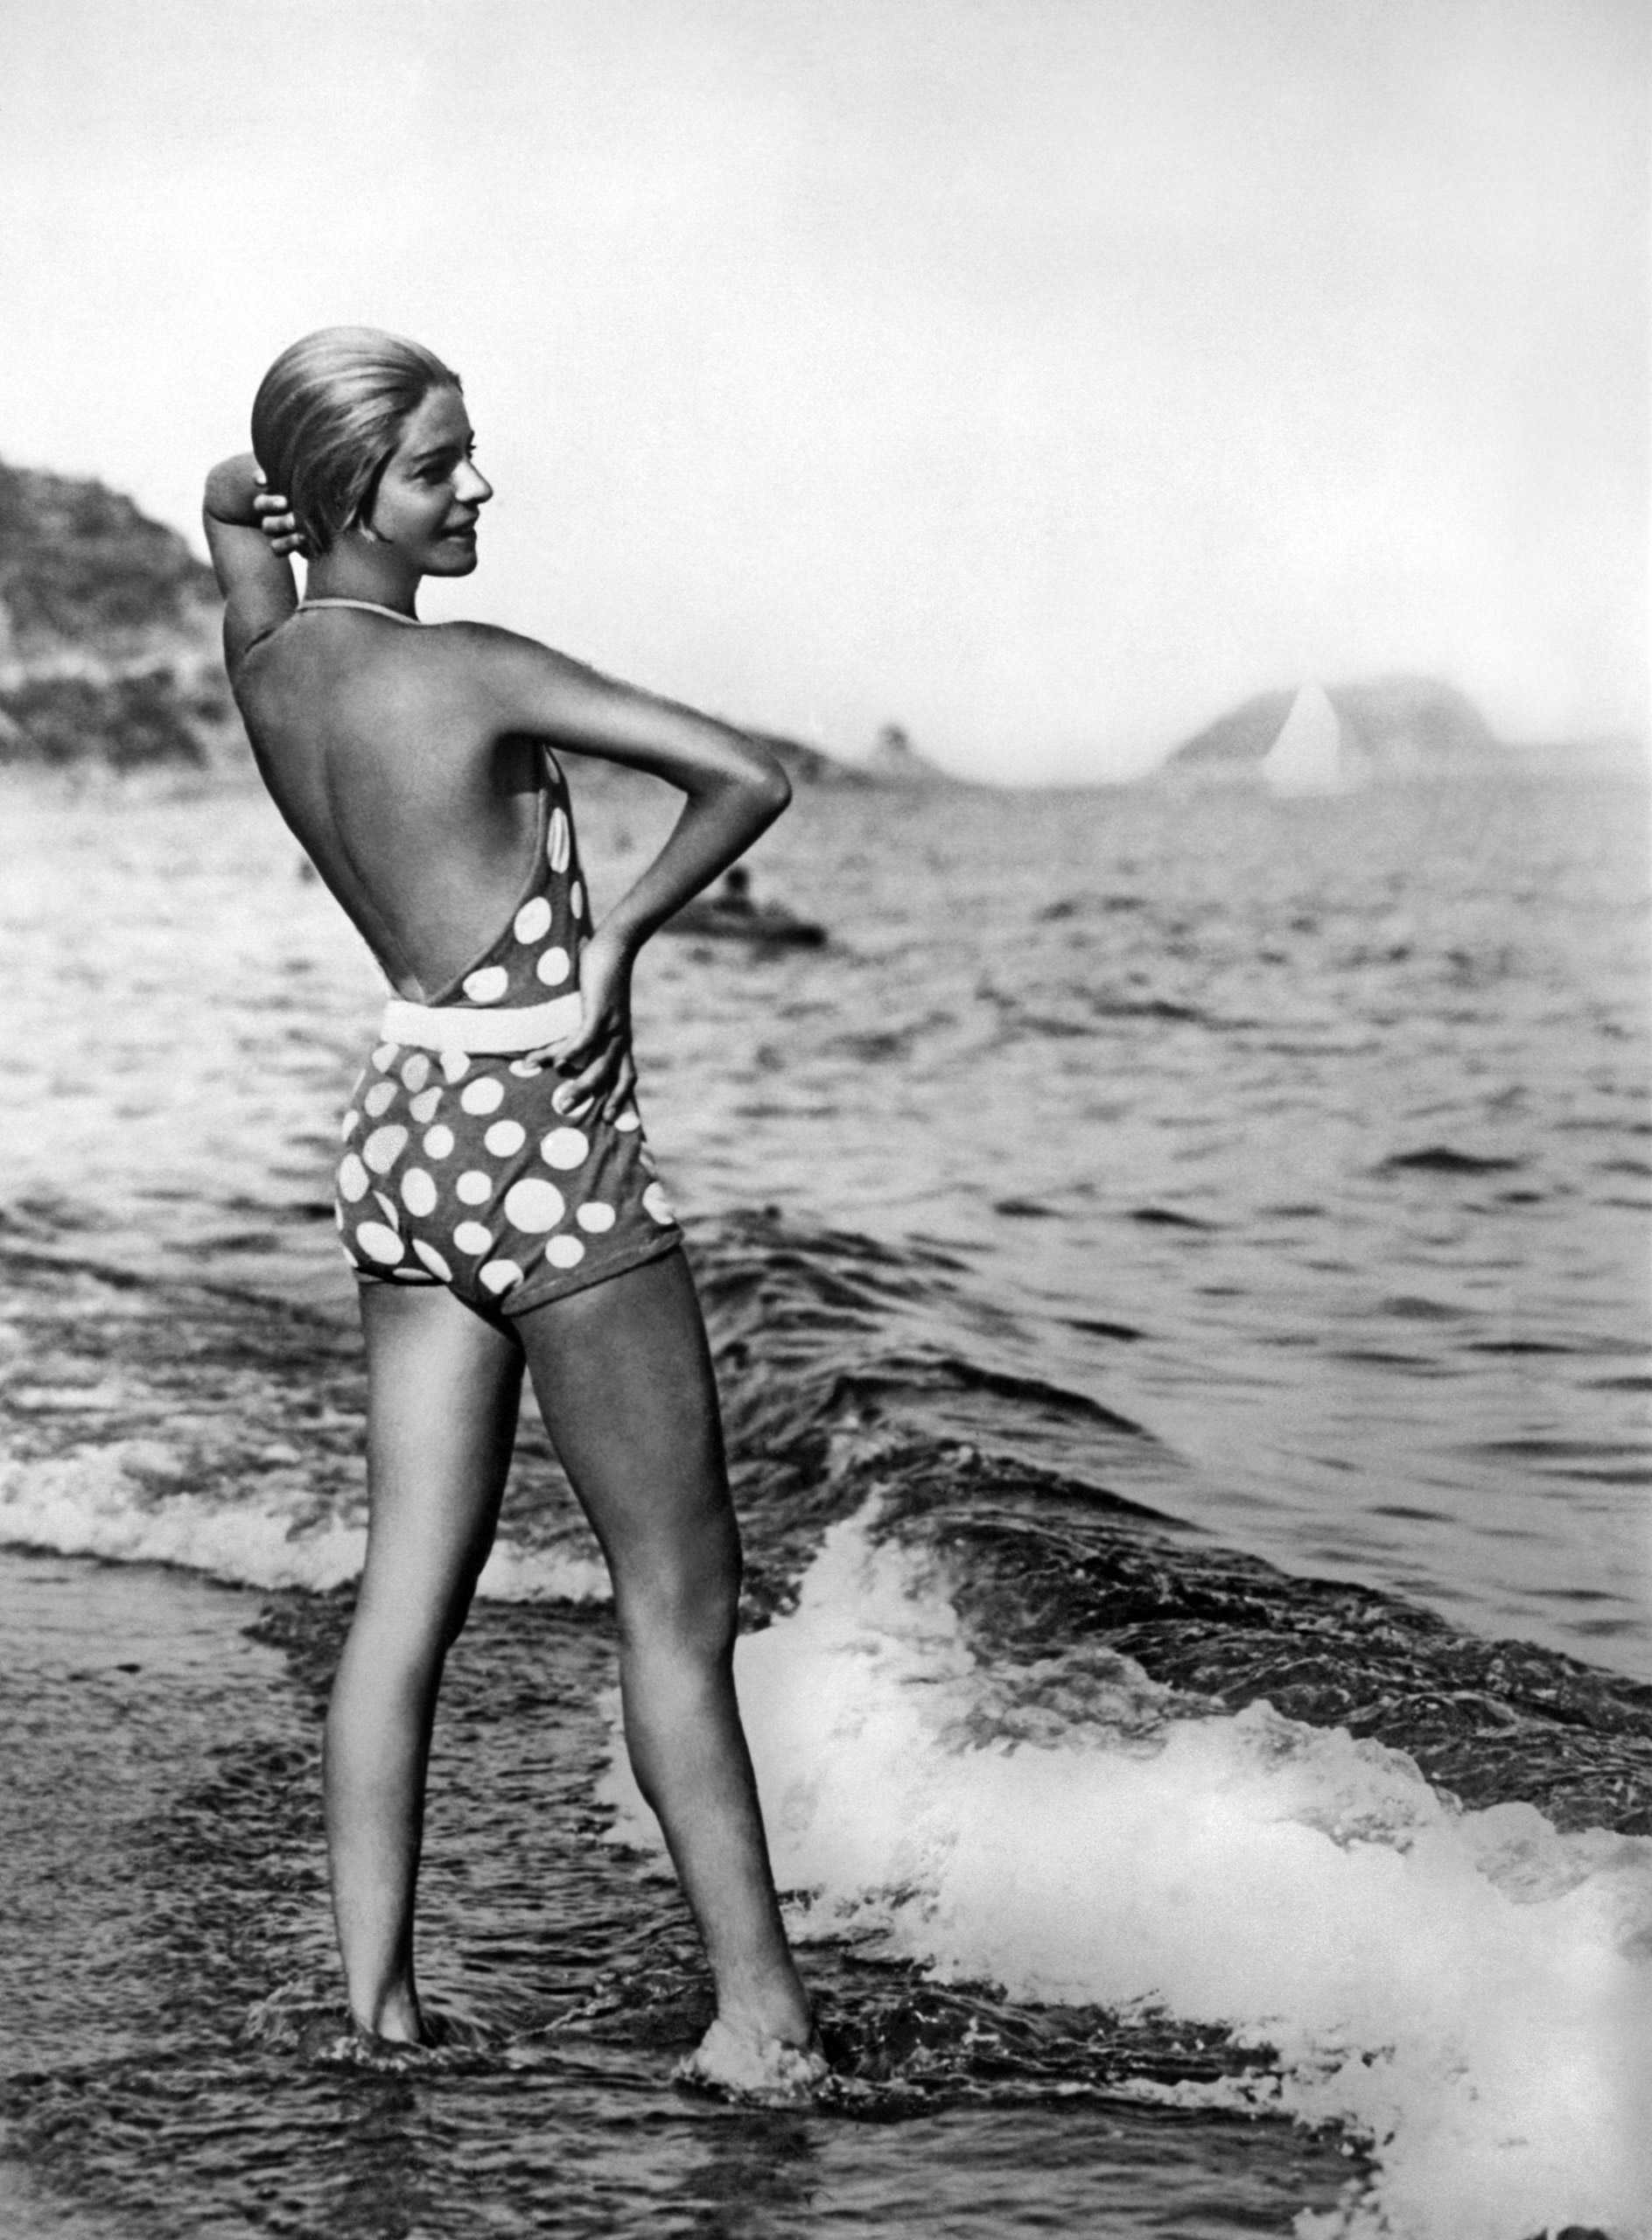 Alice Nikitina wearing a striking bathing suits at the beach in Italy, Alassio, Italy, circa 1929.